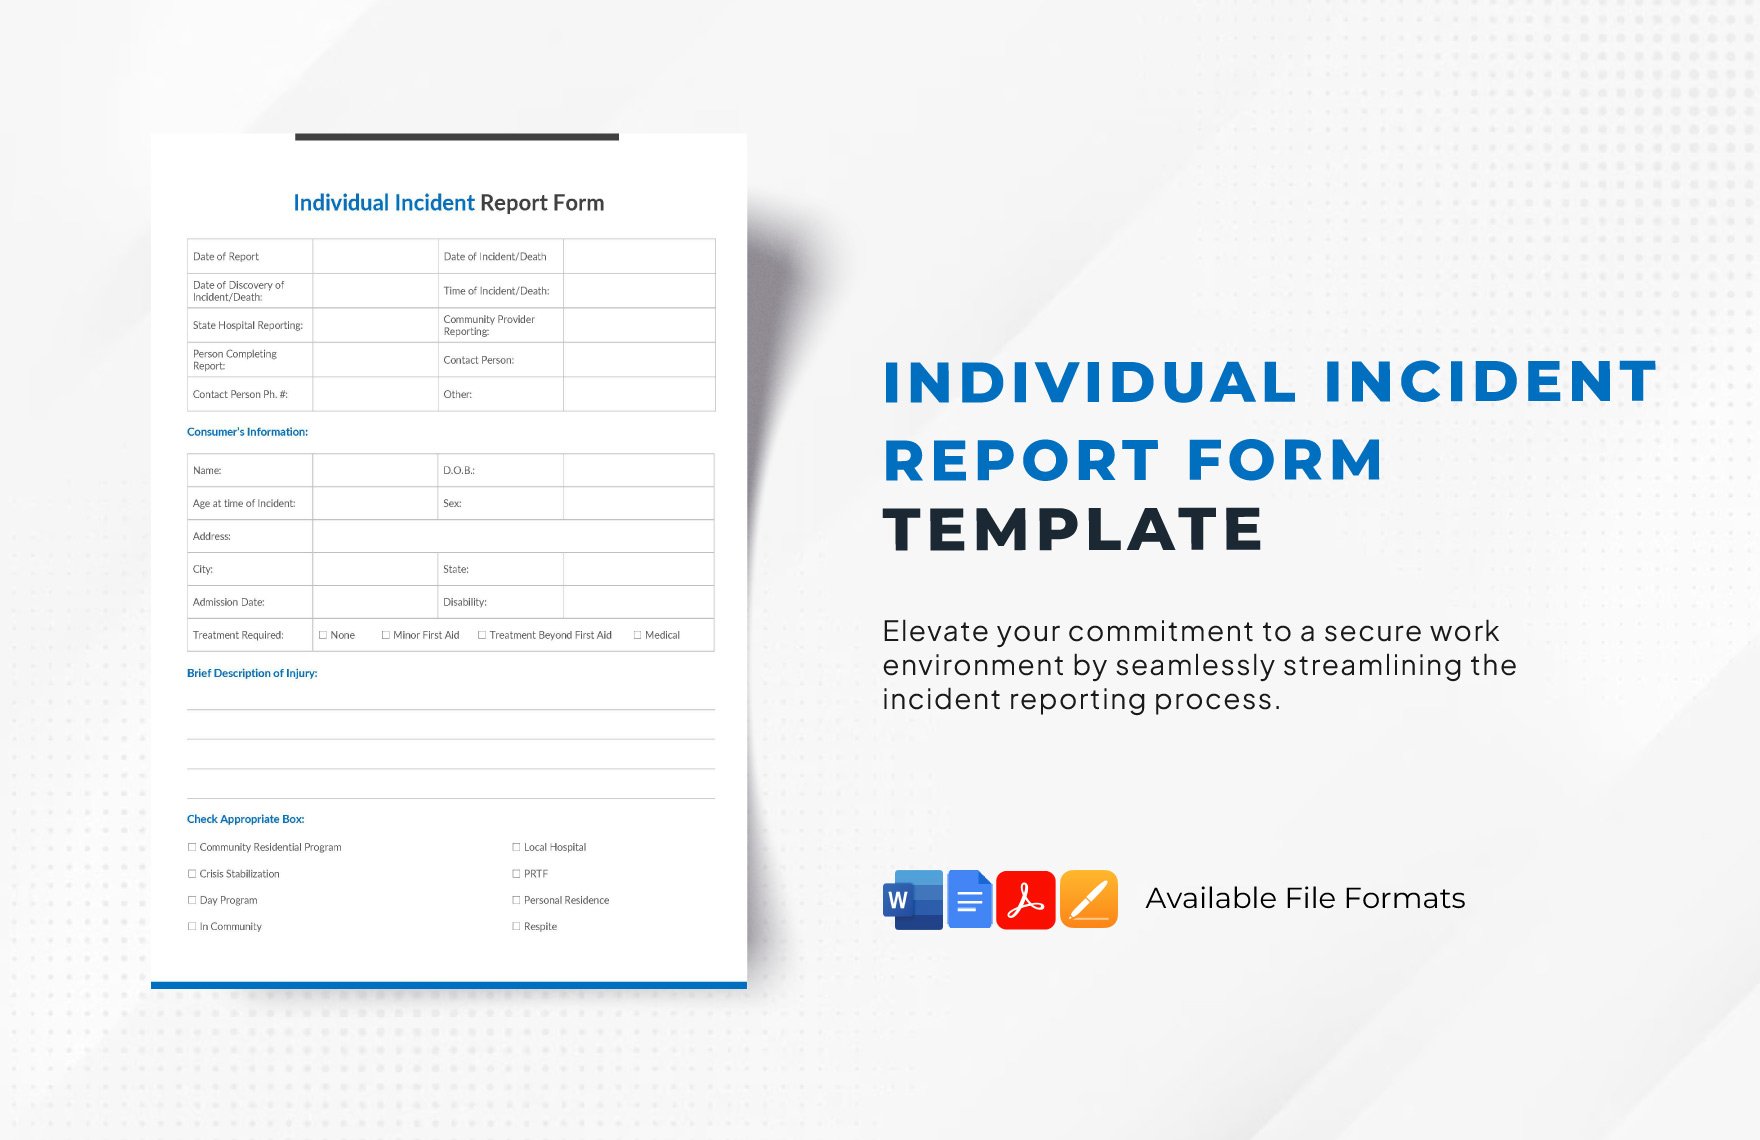 Individual Incident Report Form Template